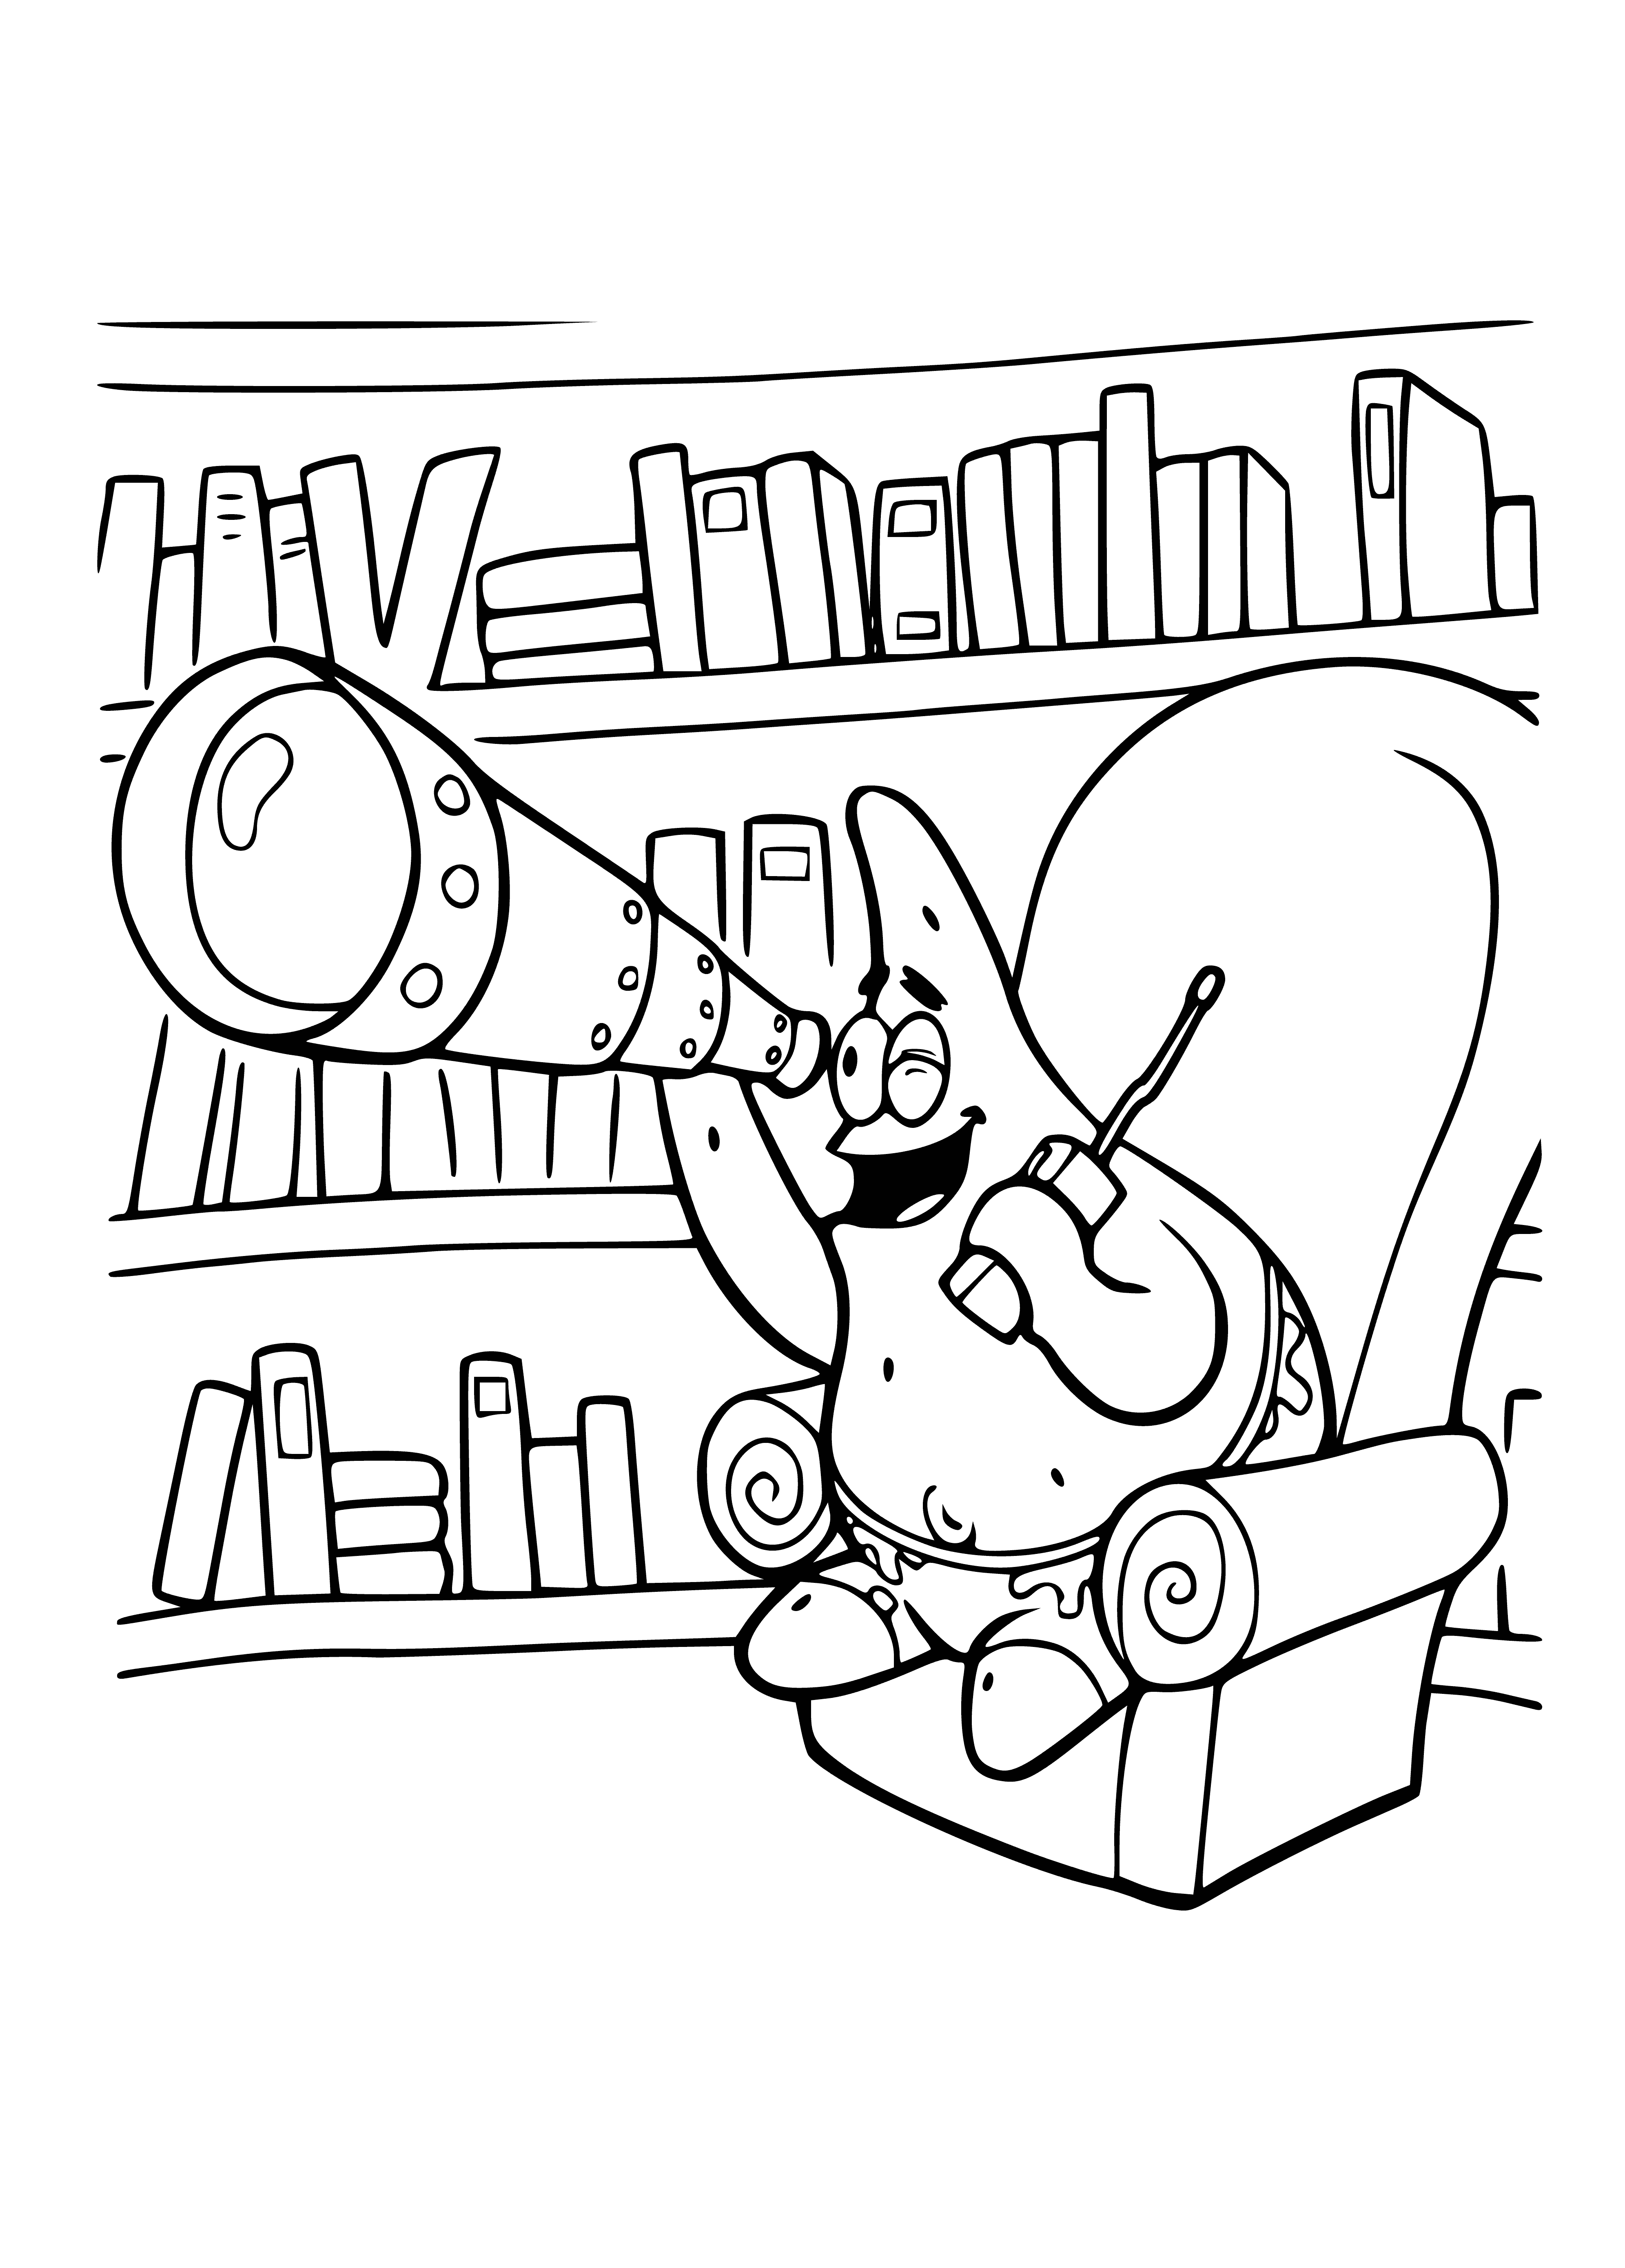 Patrick in the chair coloring page